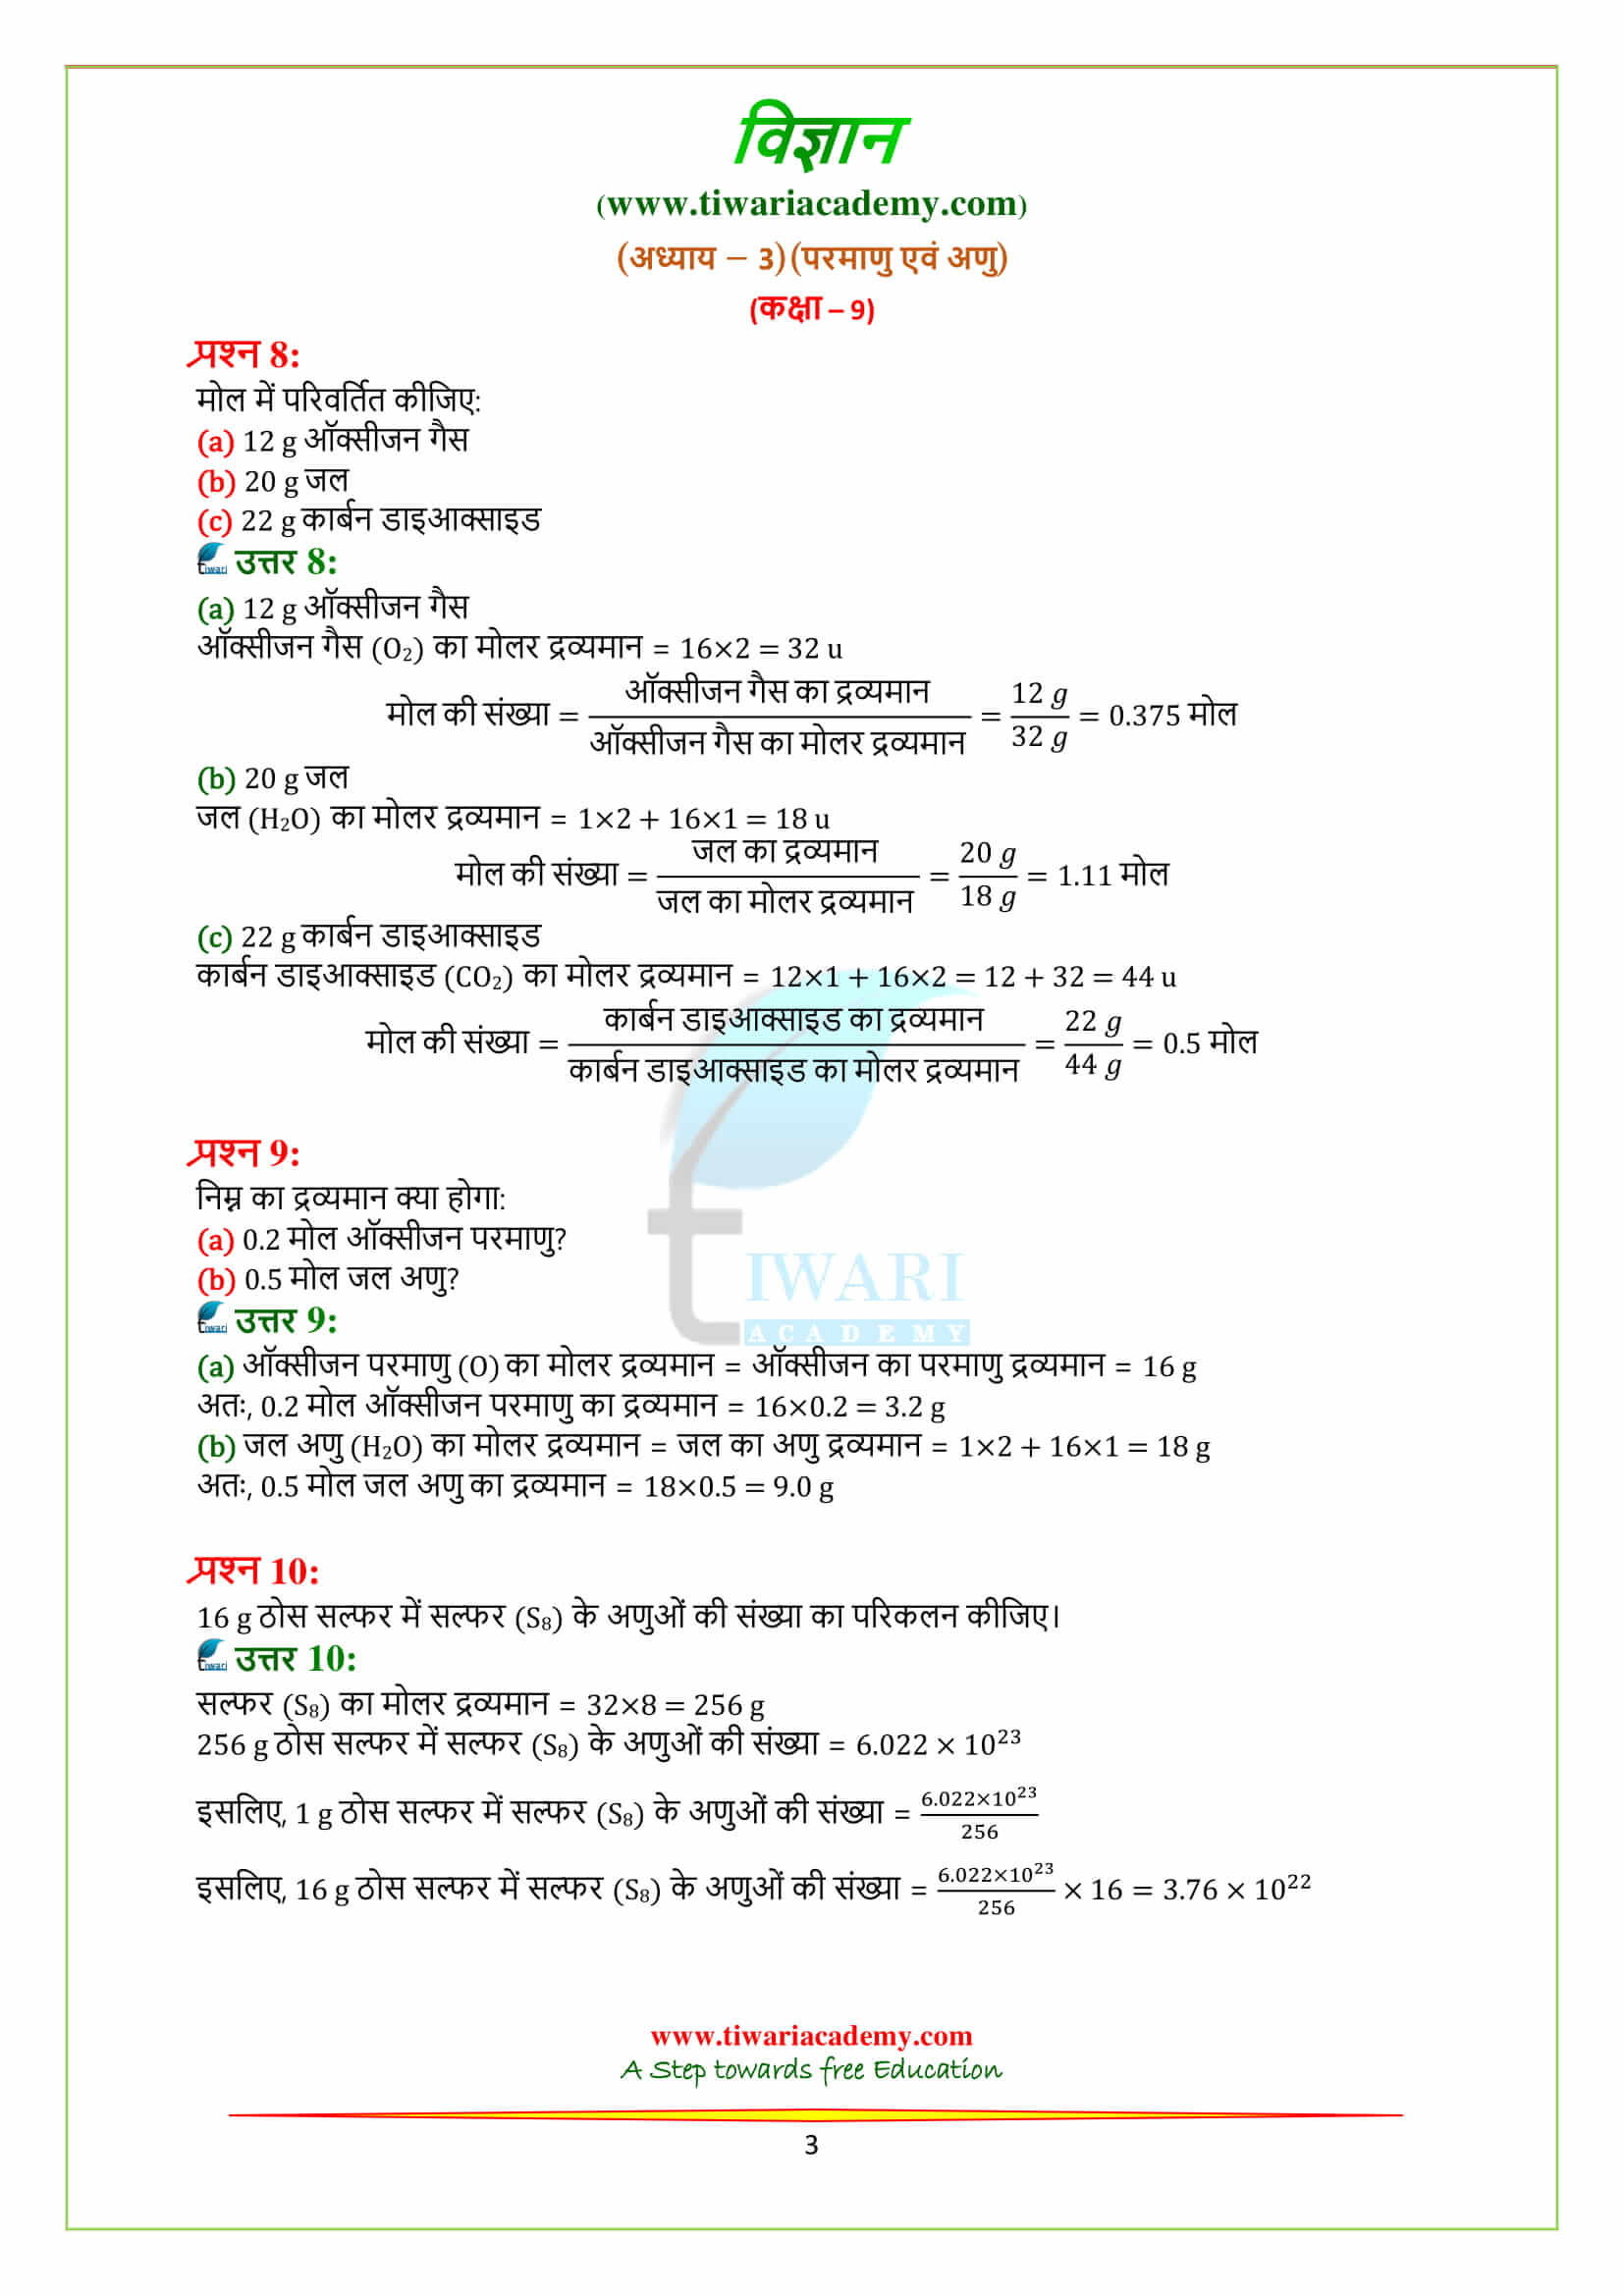 9 Science chapter 3 Exercises solutions in hindi medium